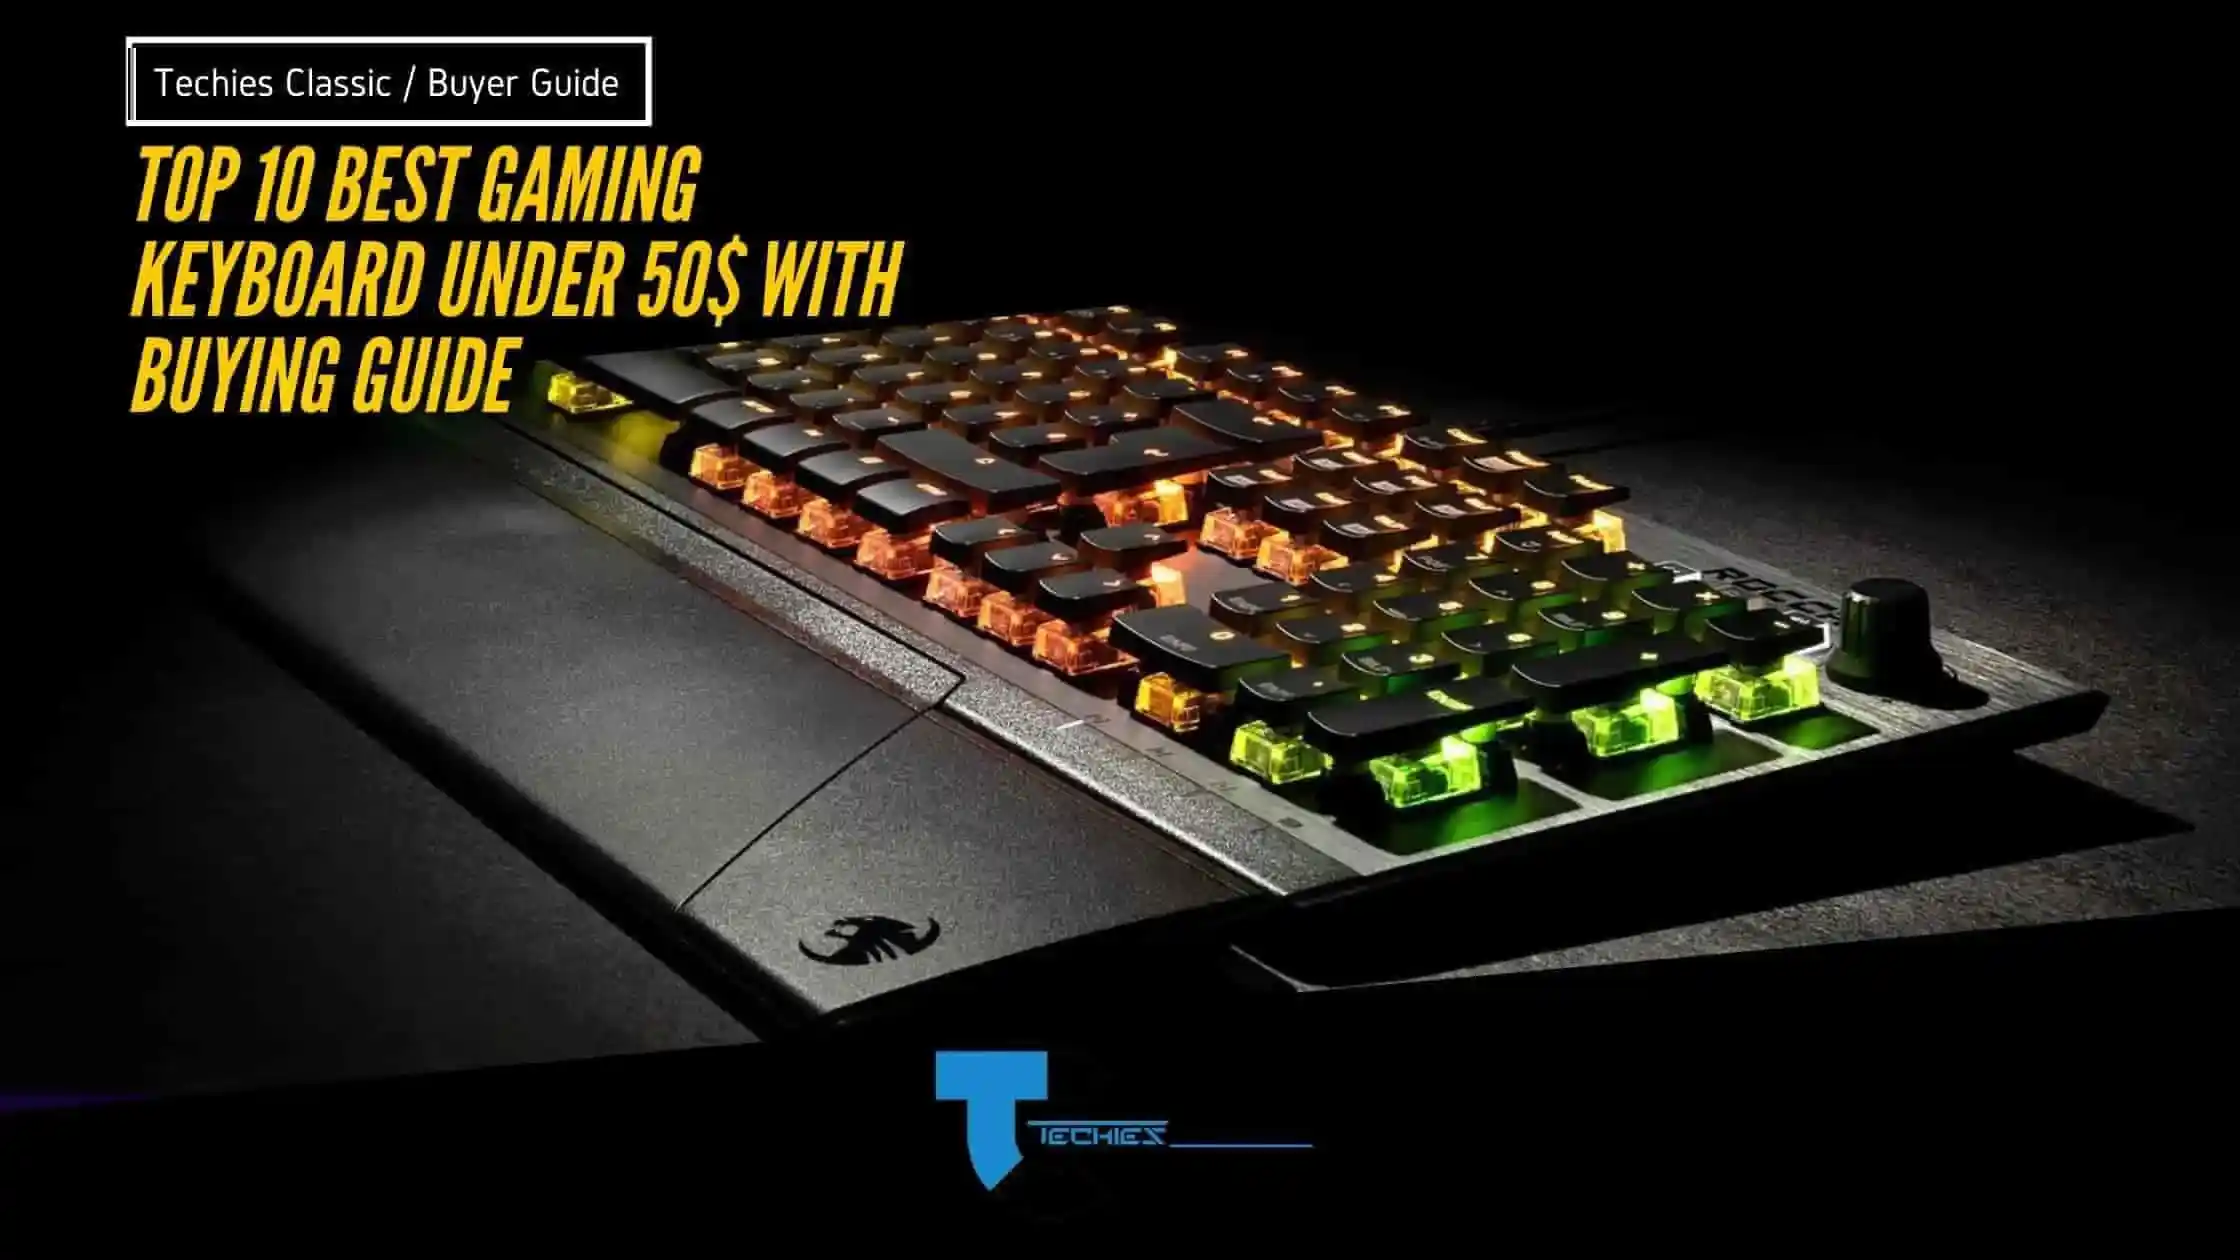 Top Gaming Keyboards Under $50 you should buy in 2022